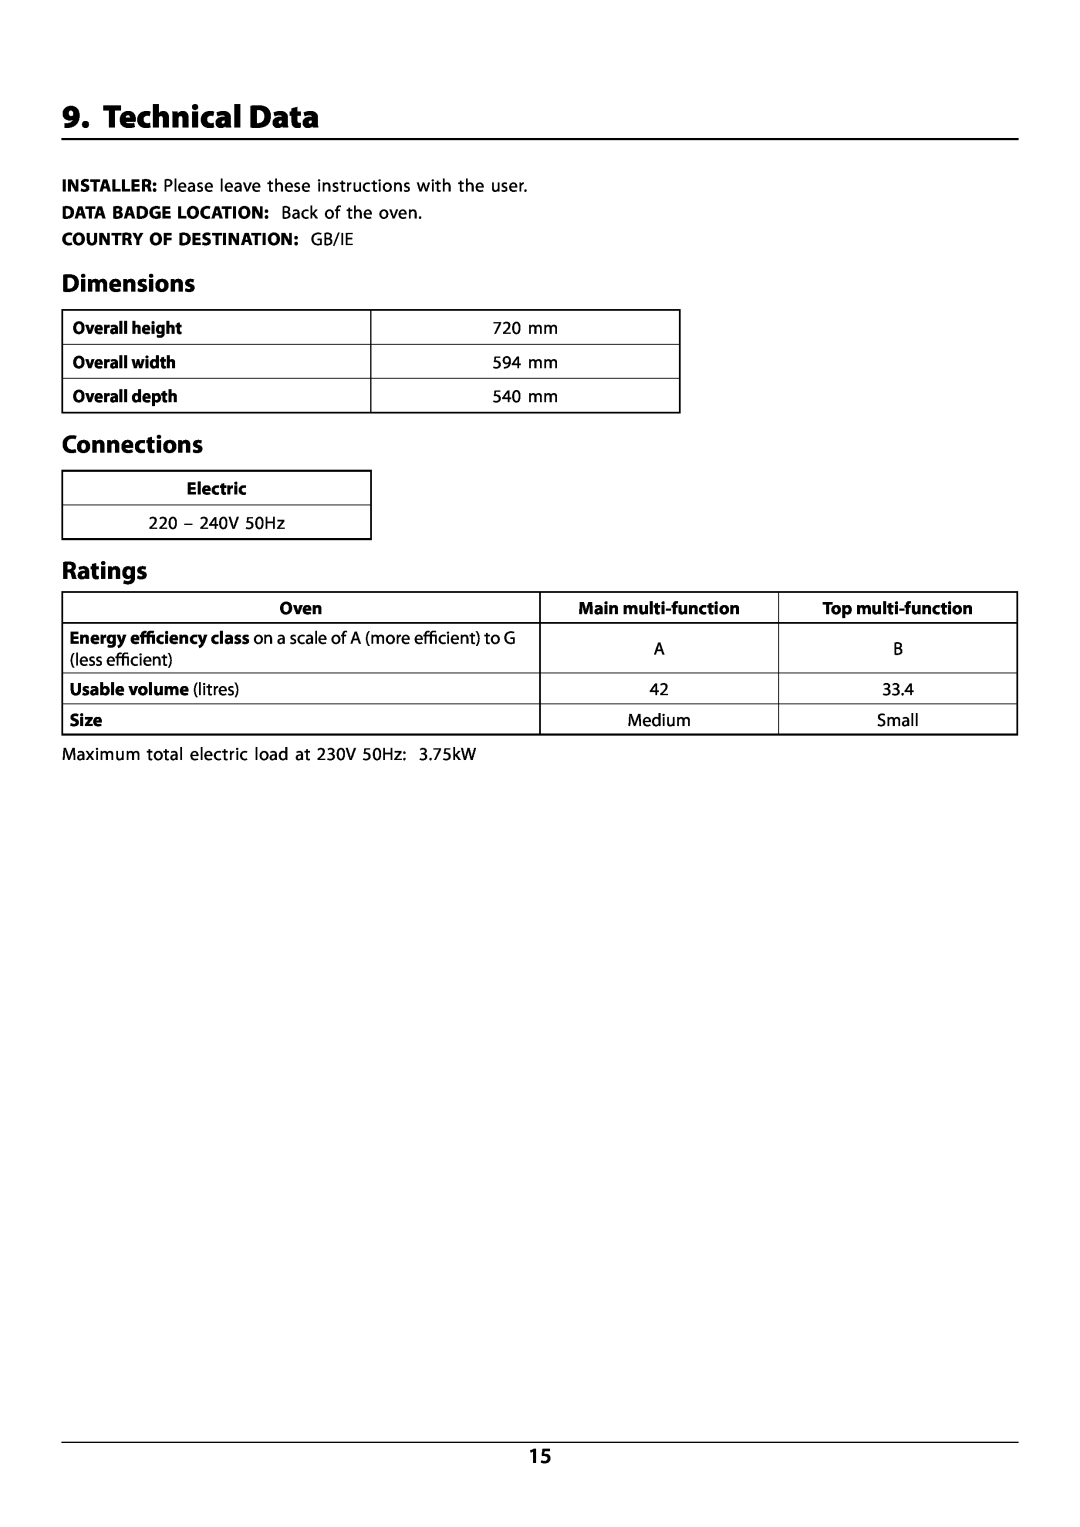 Rangemaster R7247 manual Technical Data, Dimensions, Connections, Ratings 